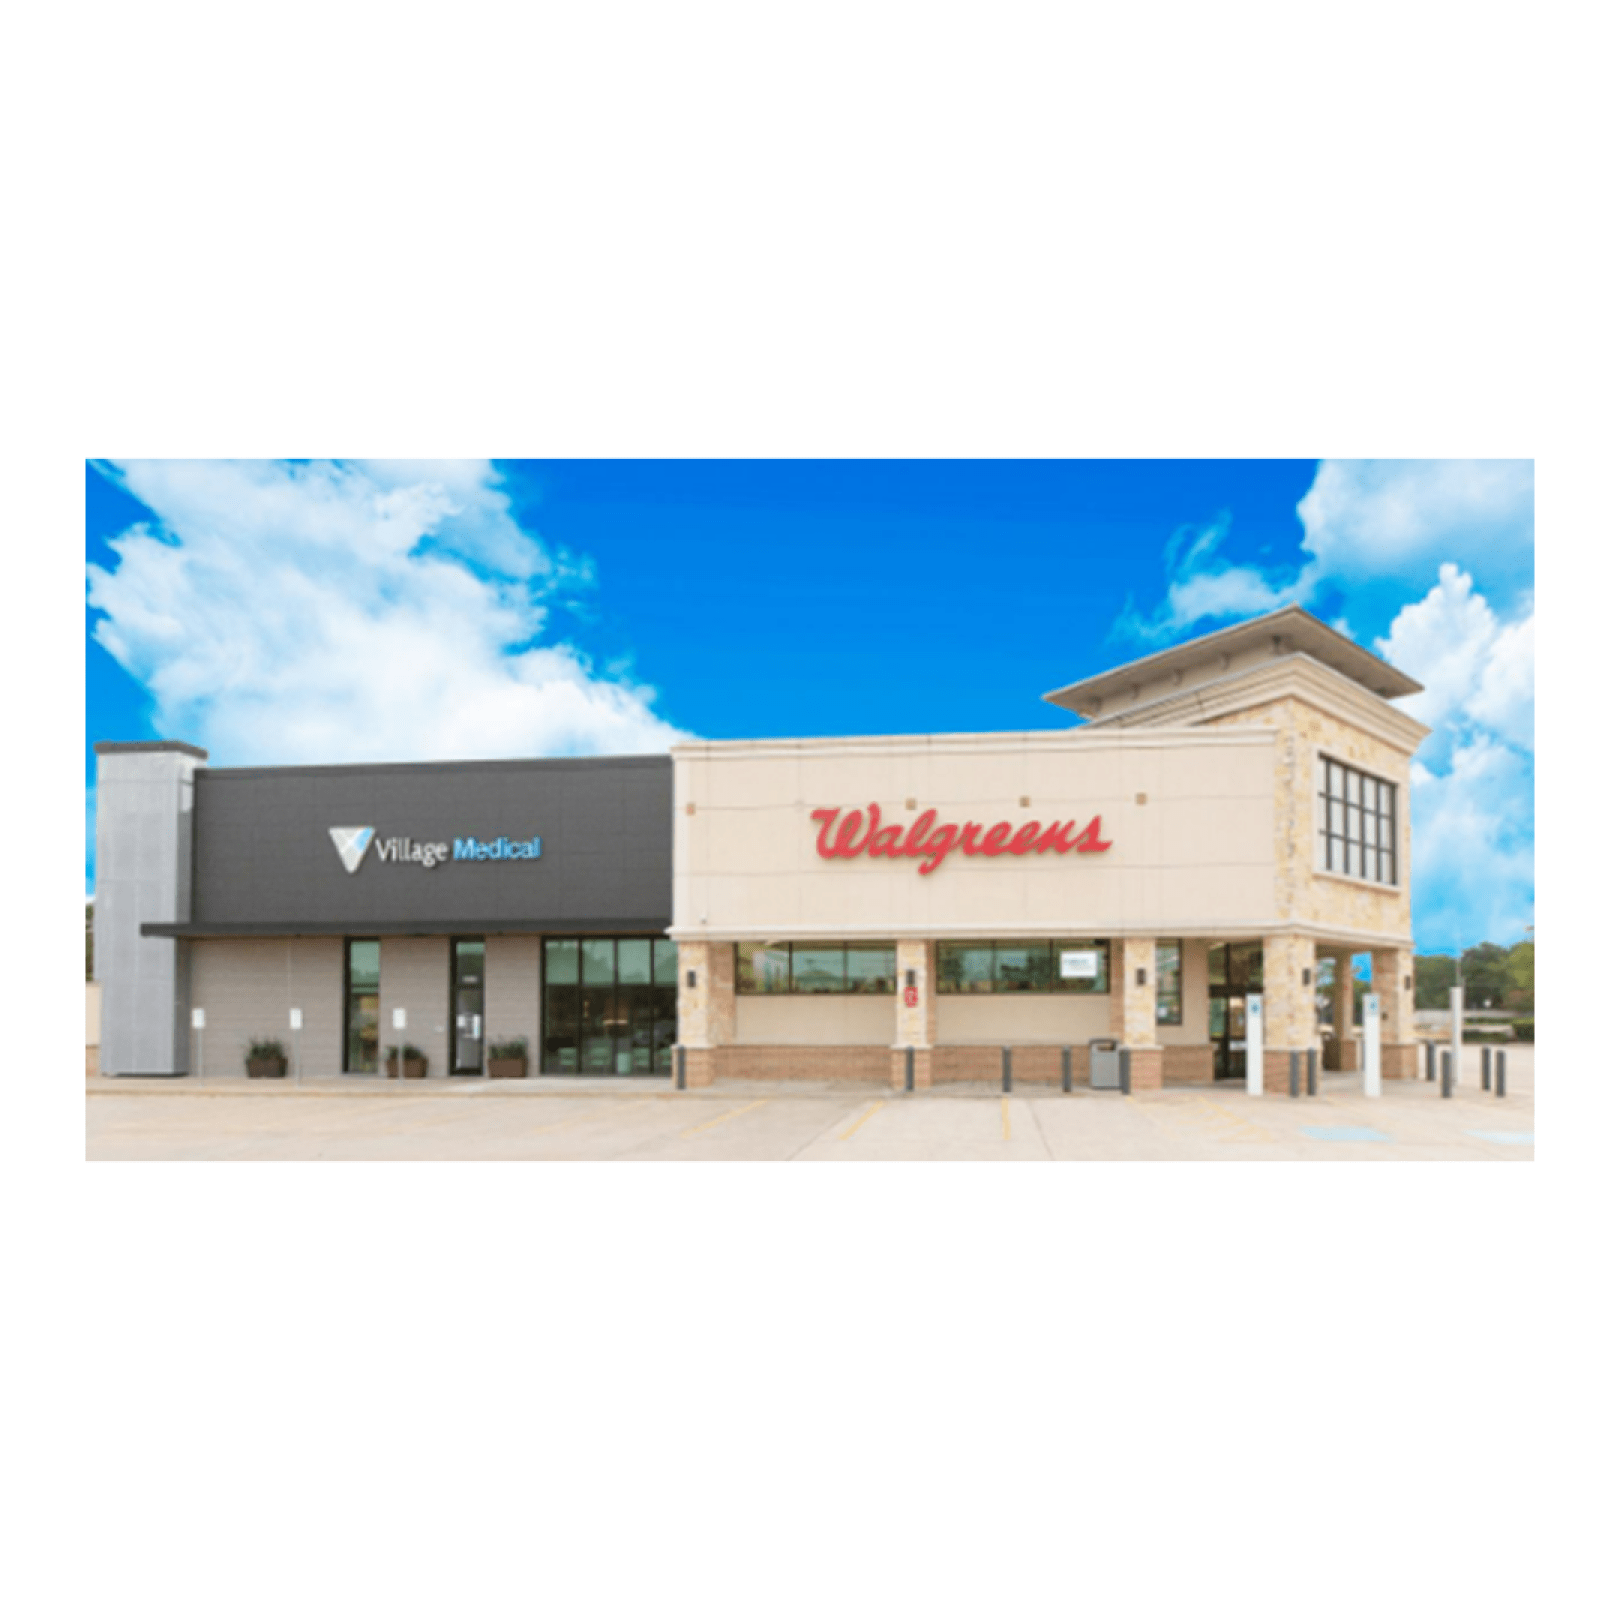 In July, WBA and VillageMD announced that Walgreens would be the first national pharmacy chain to offer full-service doctor offices co-located at stores. 